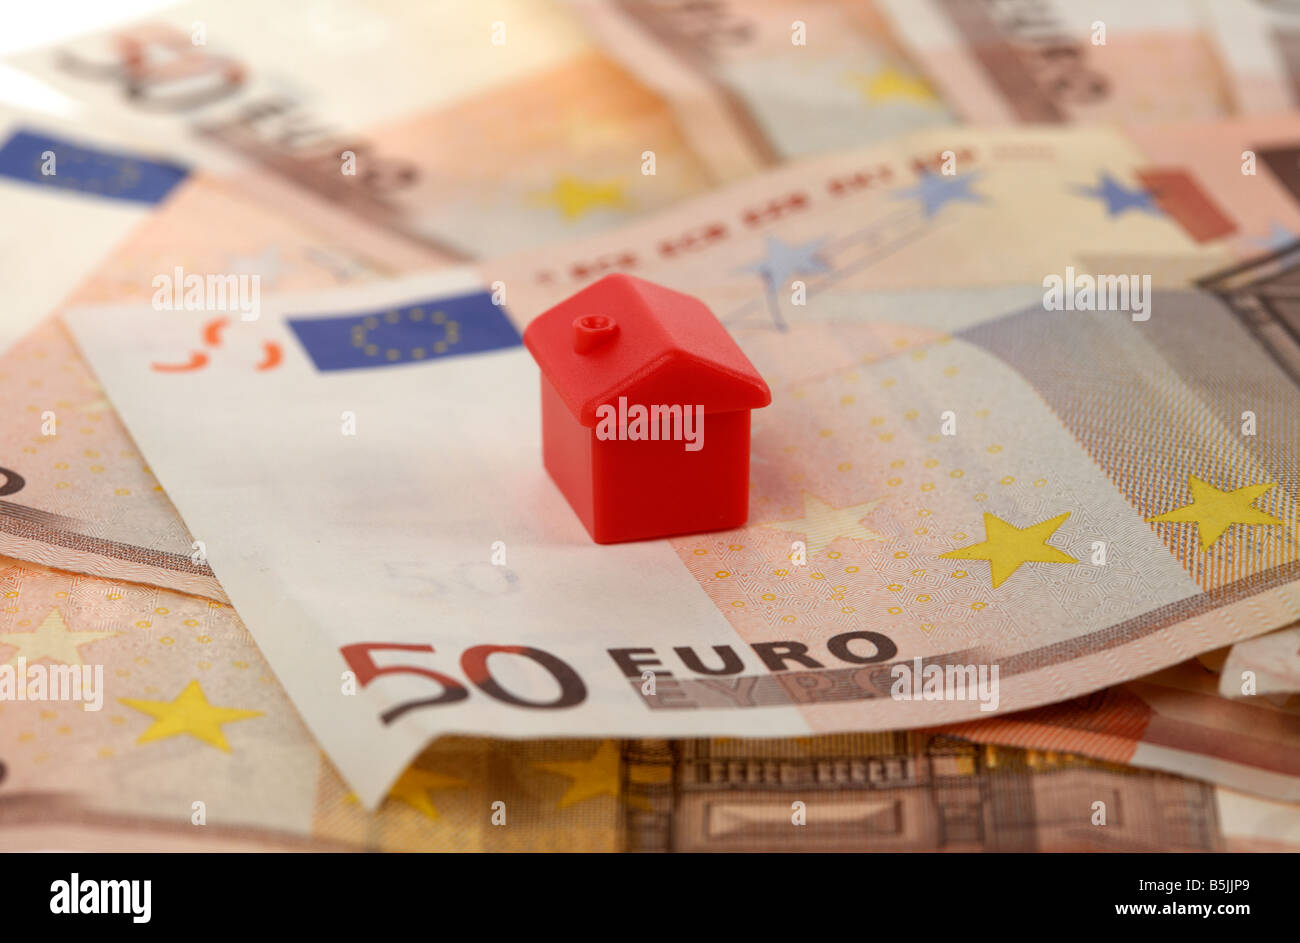 one red house on top of a pile of 50 euro bank notes cash Stock Photo